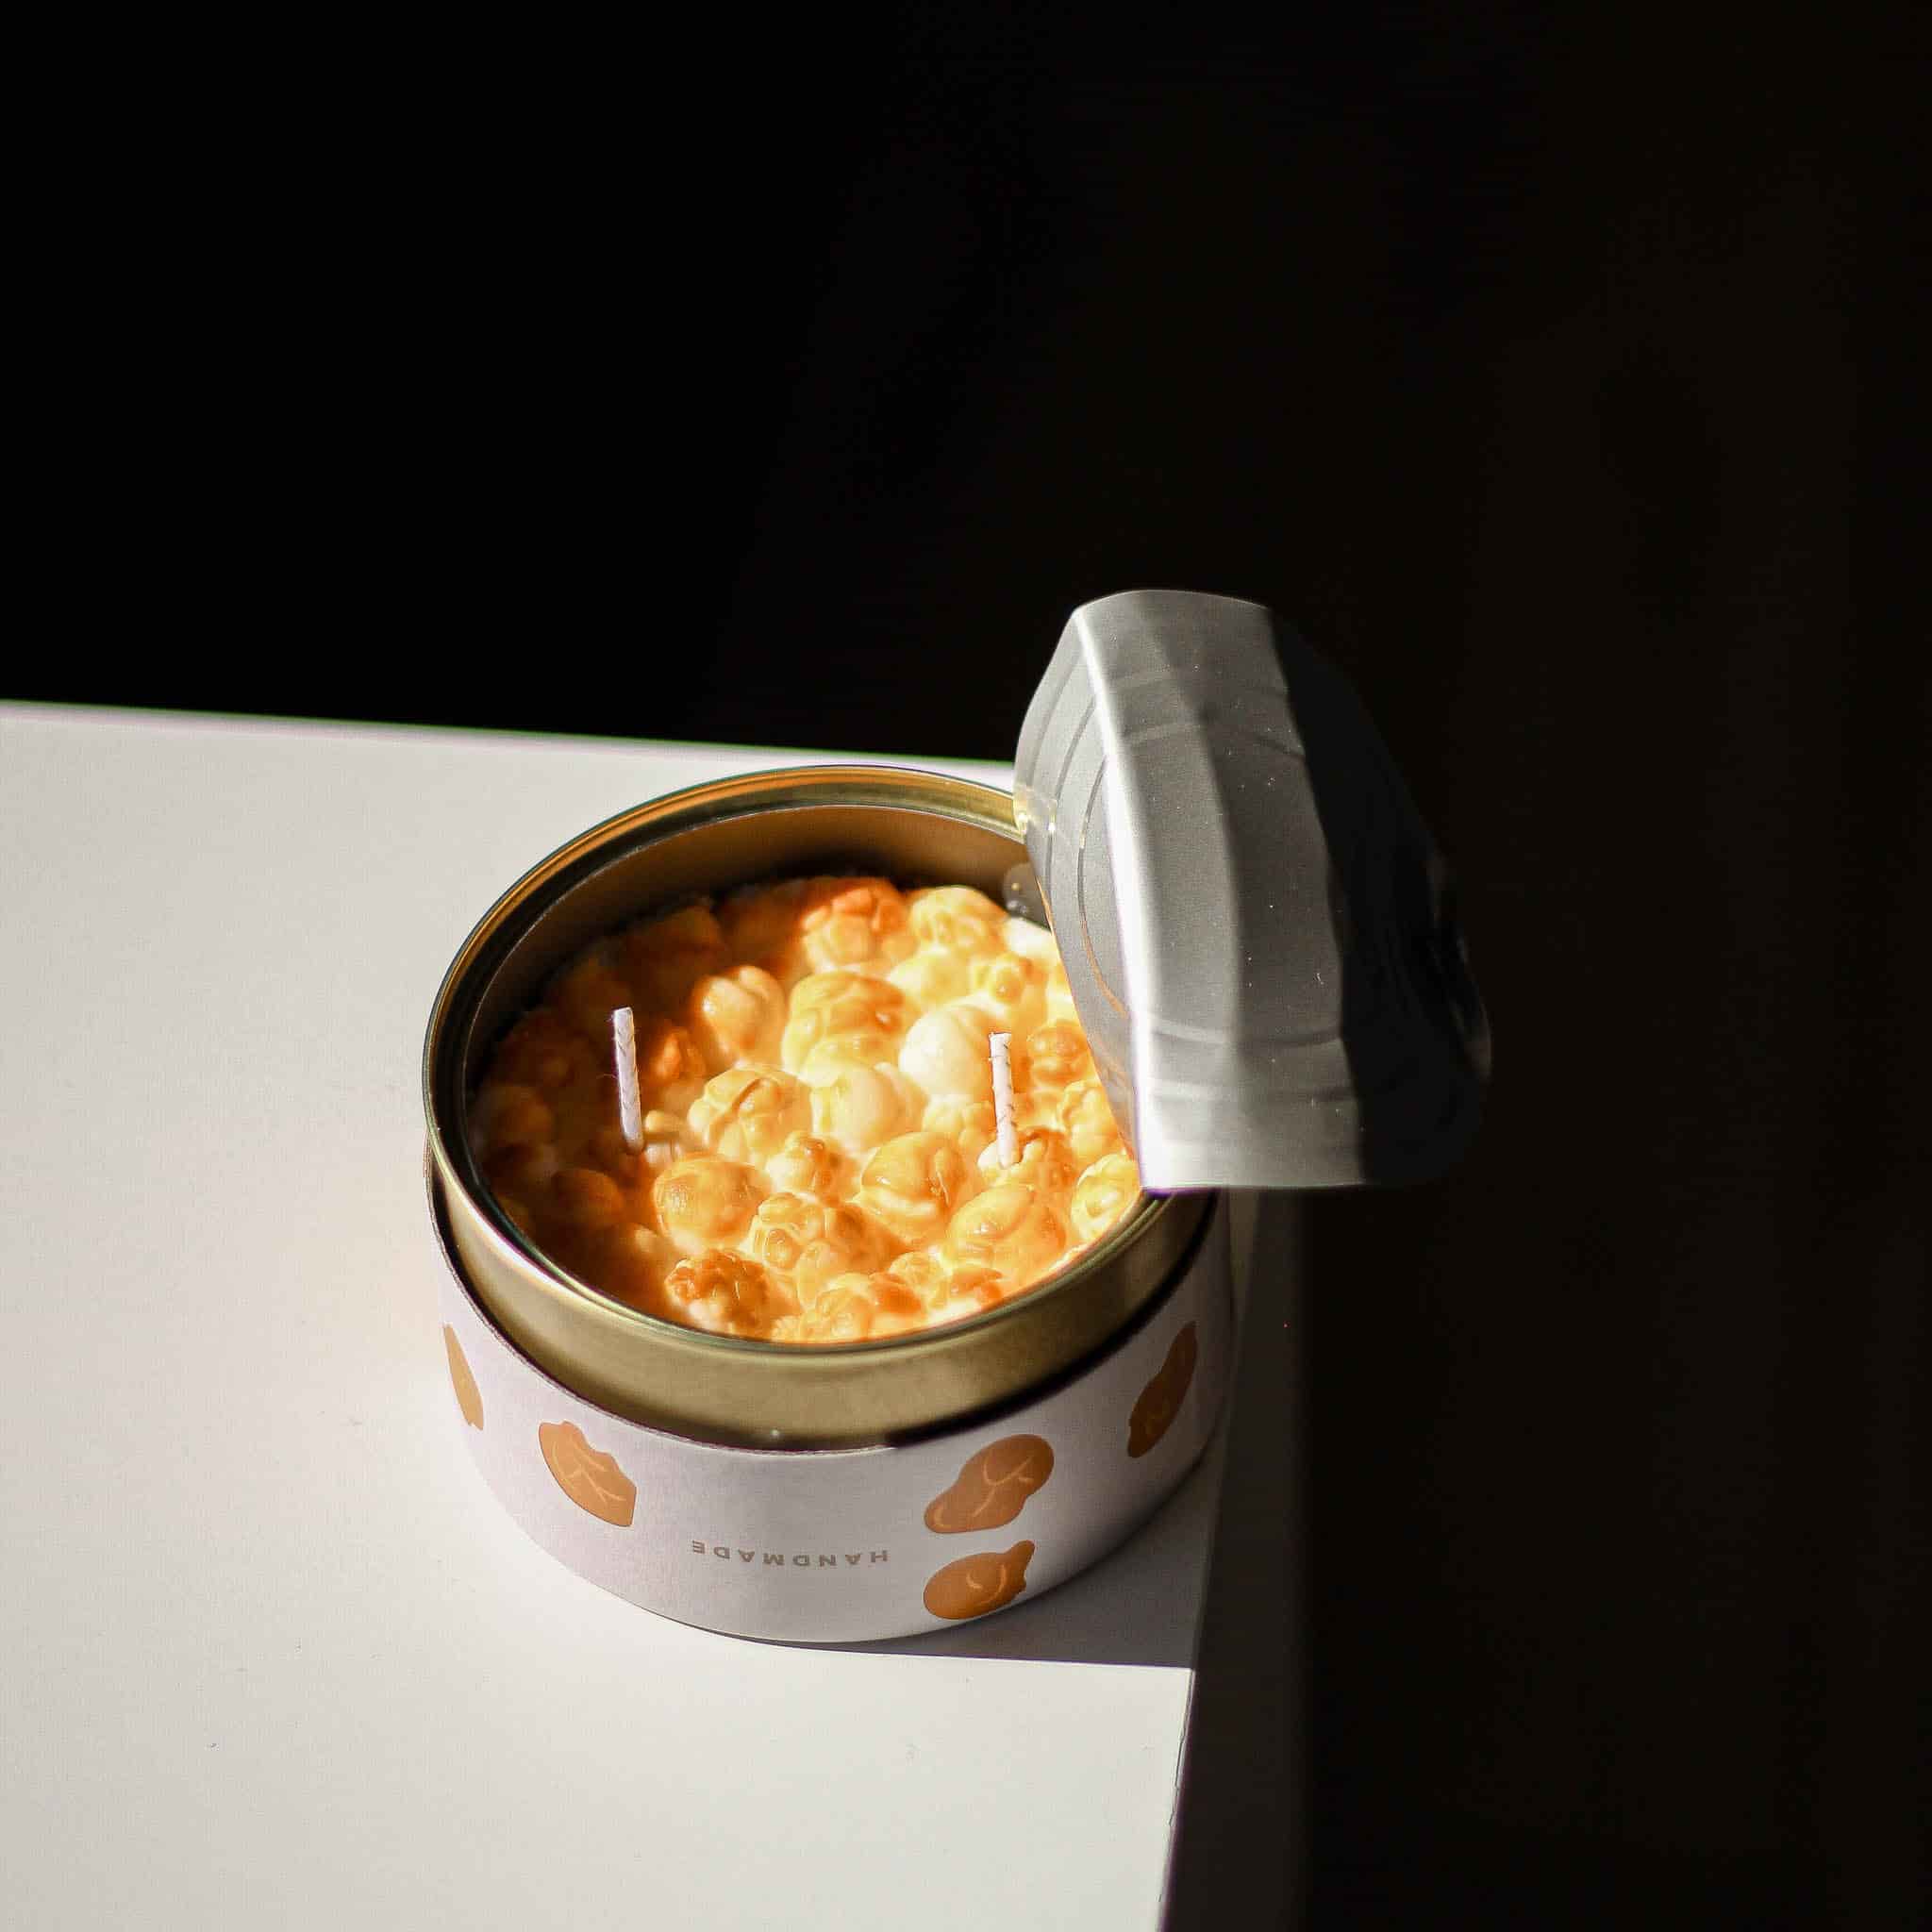 CandleCan Caramel Popcorn Scented Candle